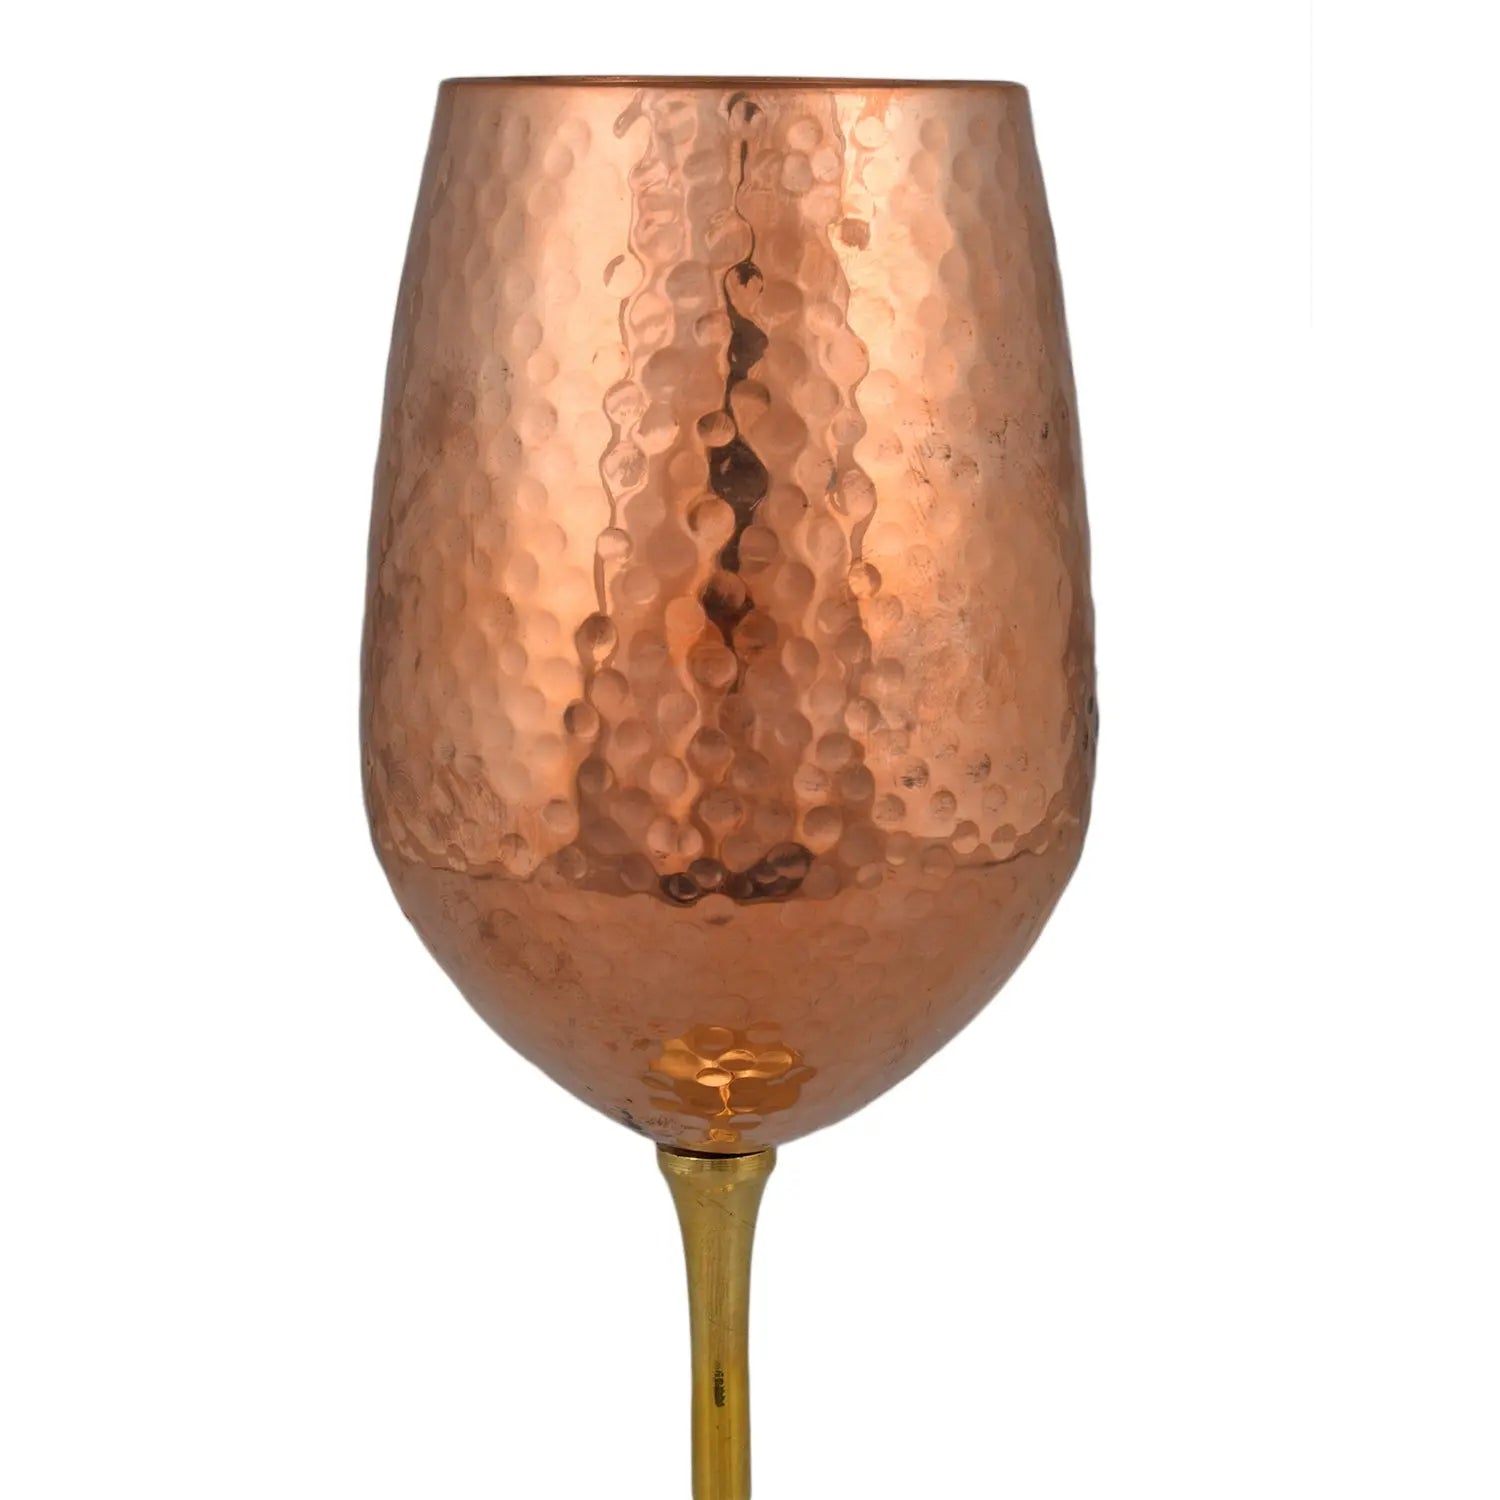 Crockery Wala And Company Hammered Copper Goblet Champagne Wine Glass, Perfect Drinking Experience, 300 ML - CROCKERY WALA AND COMPANY 